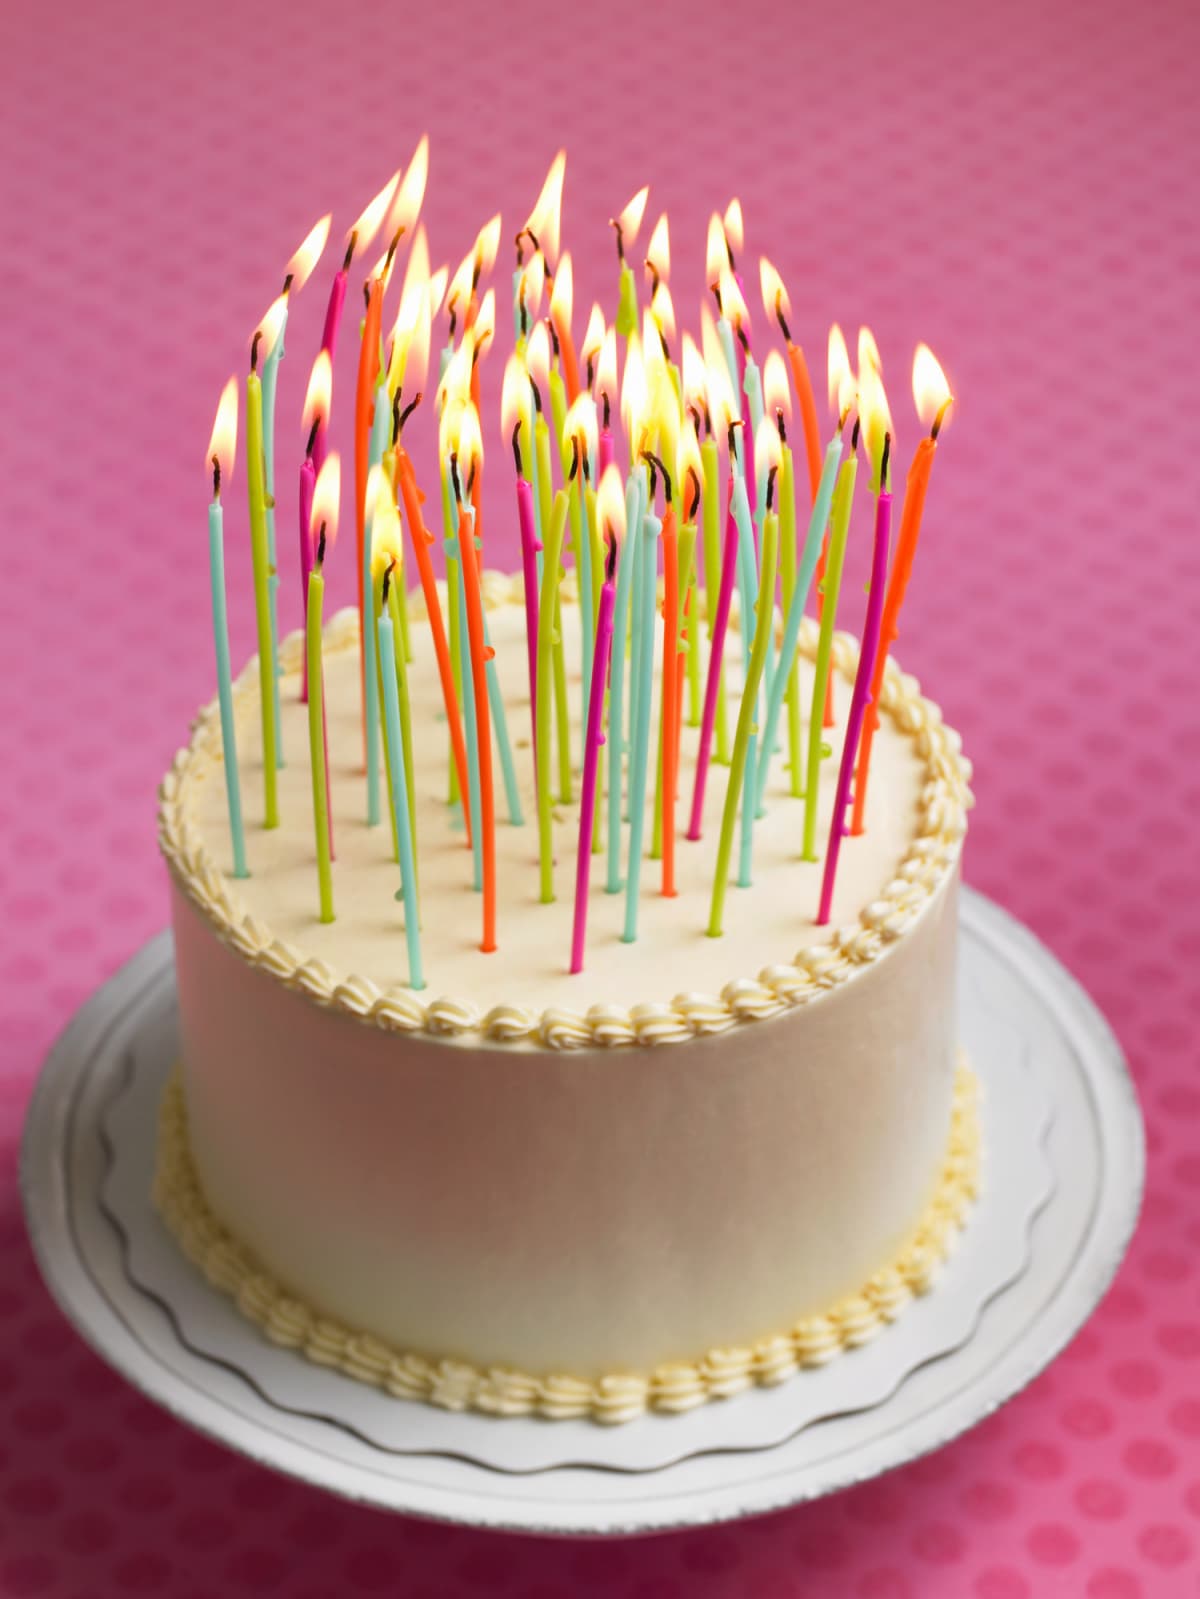 A birthday cake with many candles on a pink background